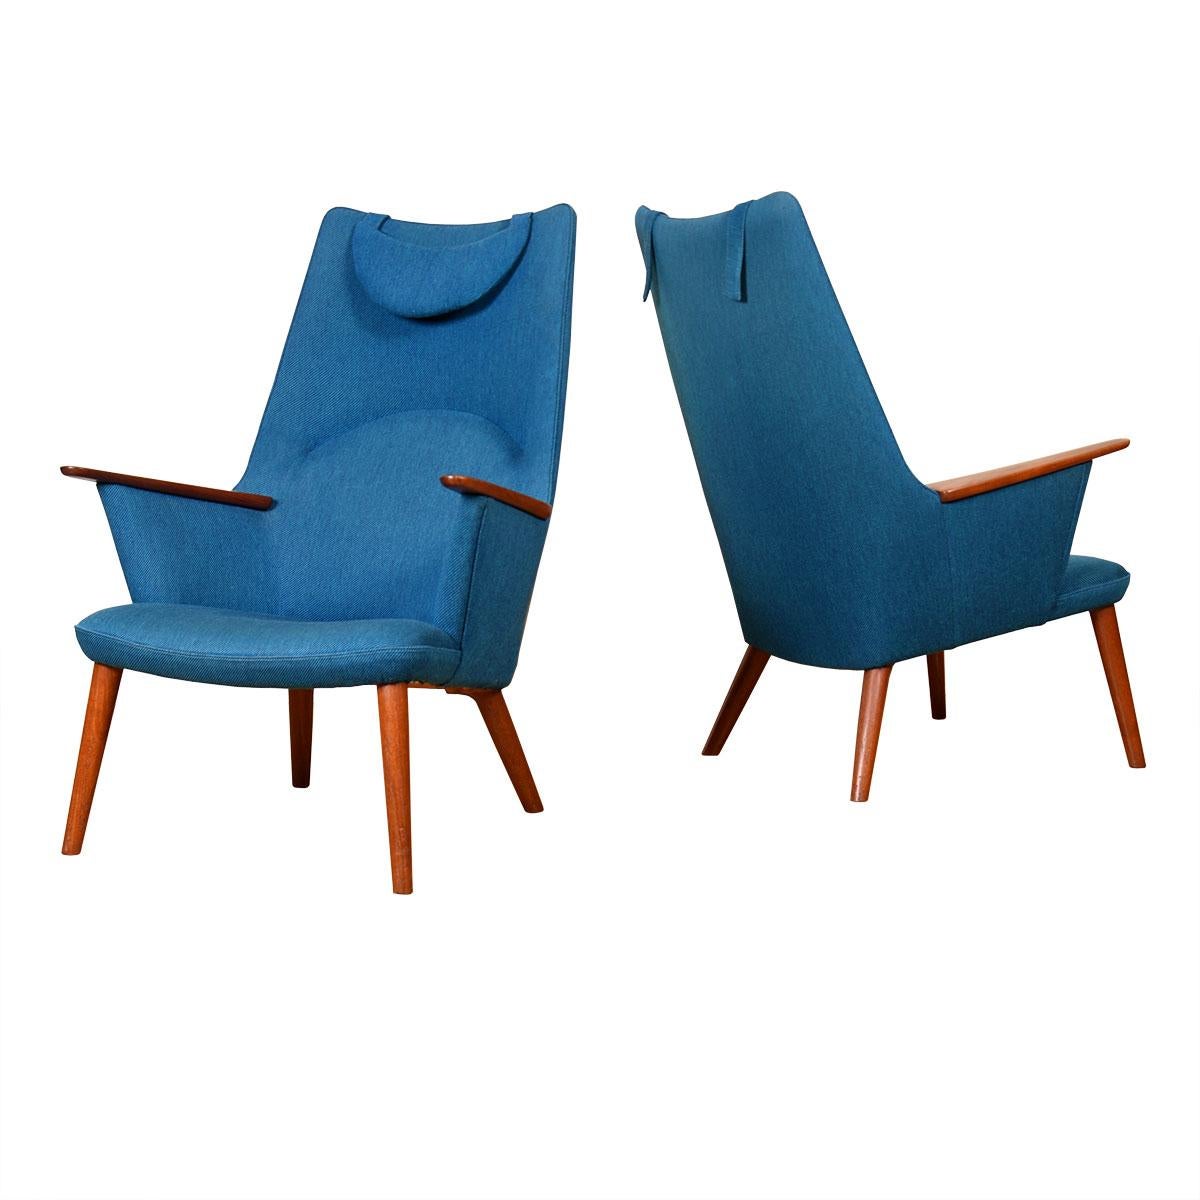 Fabric Pair of Hans Wegner “Mama Bear” AP-27 Easy Lounge Chairs for A. P. Stolen